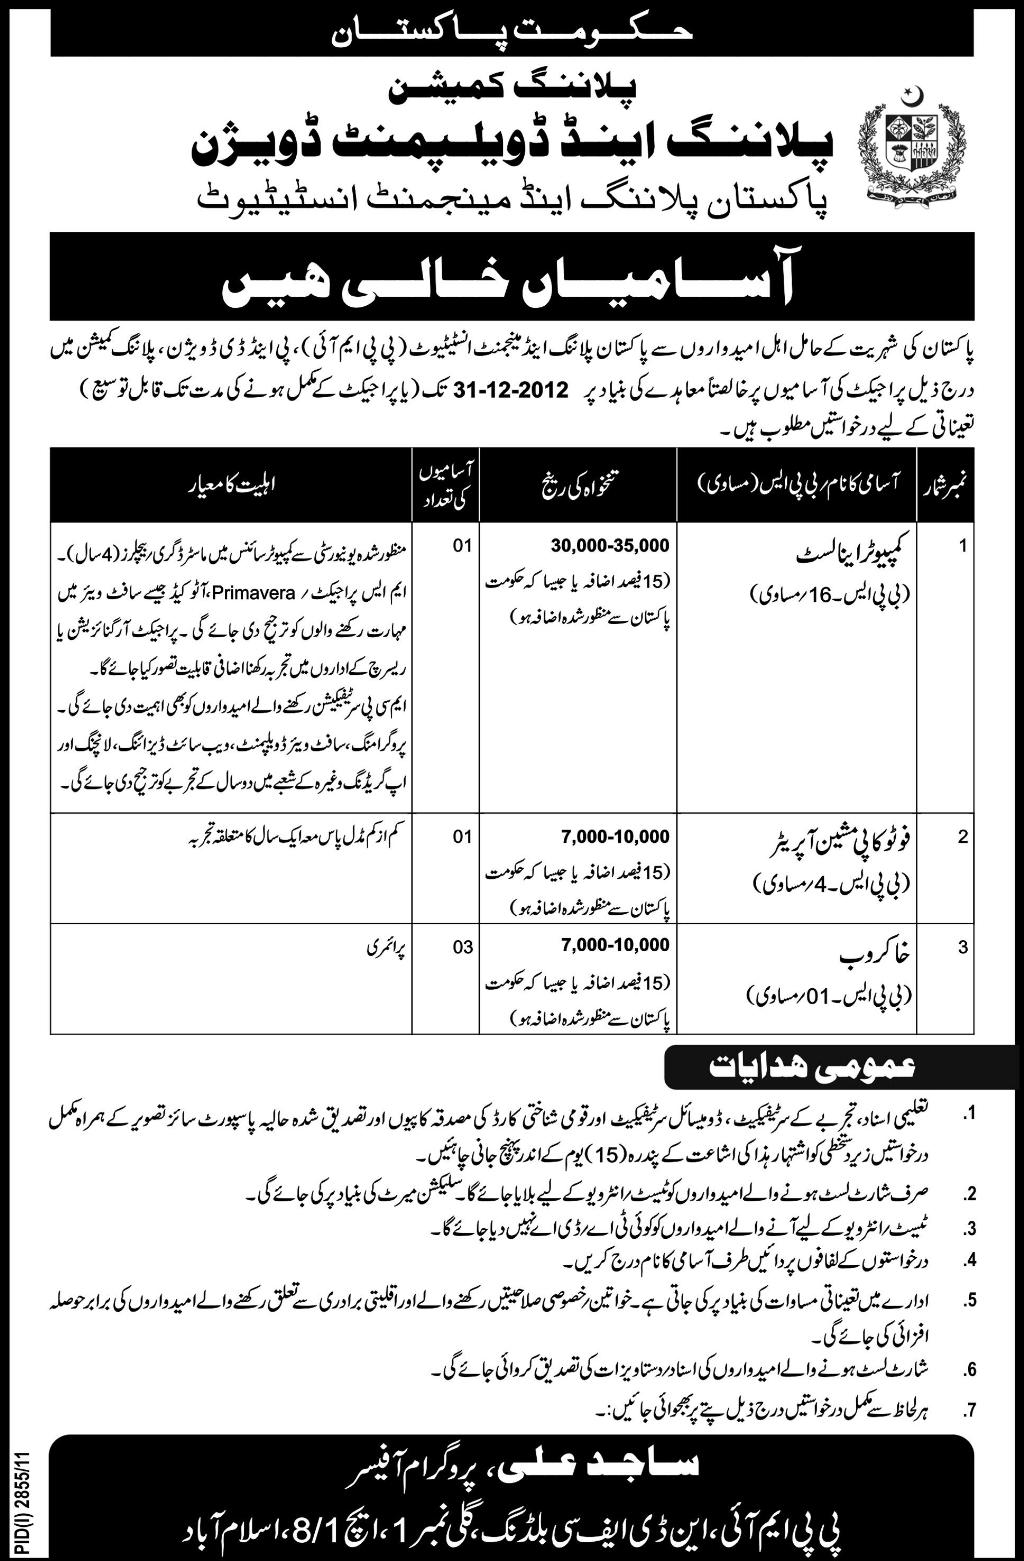 Planning and Development Division, Planning Commission Government of Pakistan Jobs Opportunities